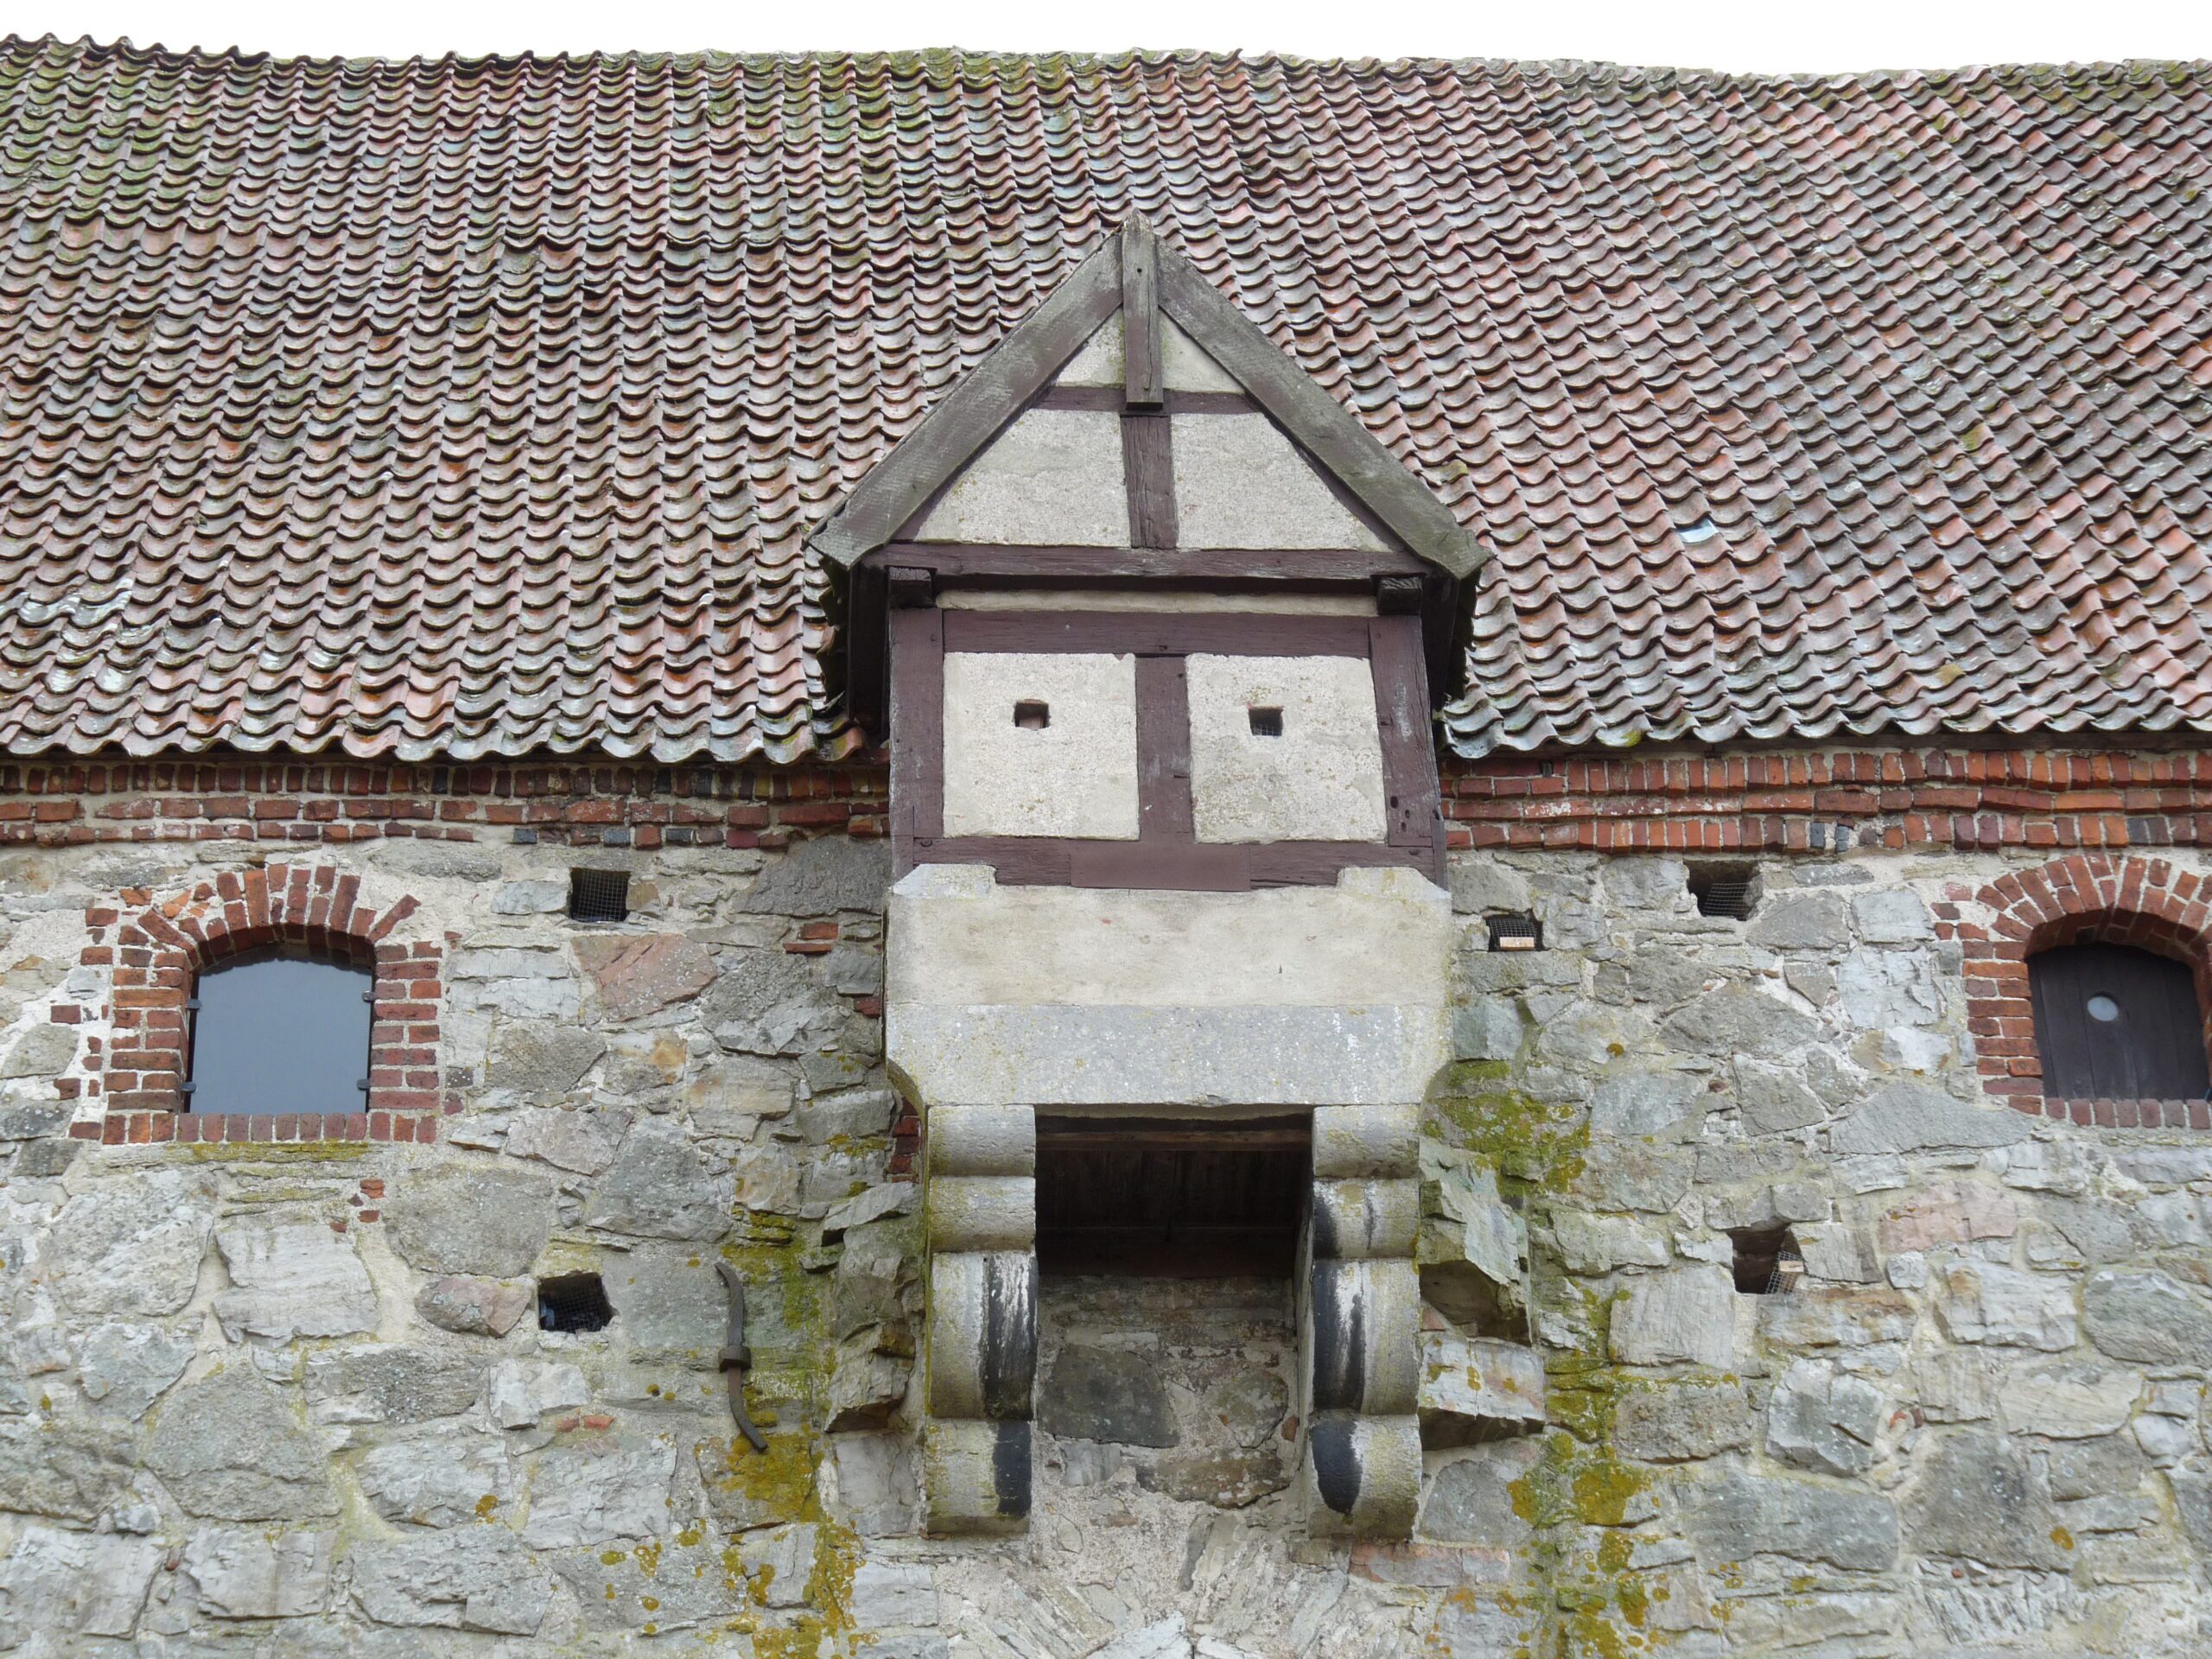 A projecting extension high up on the castle's outer wall, just below the roof.